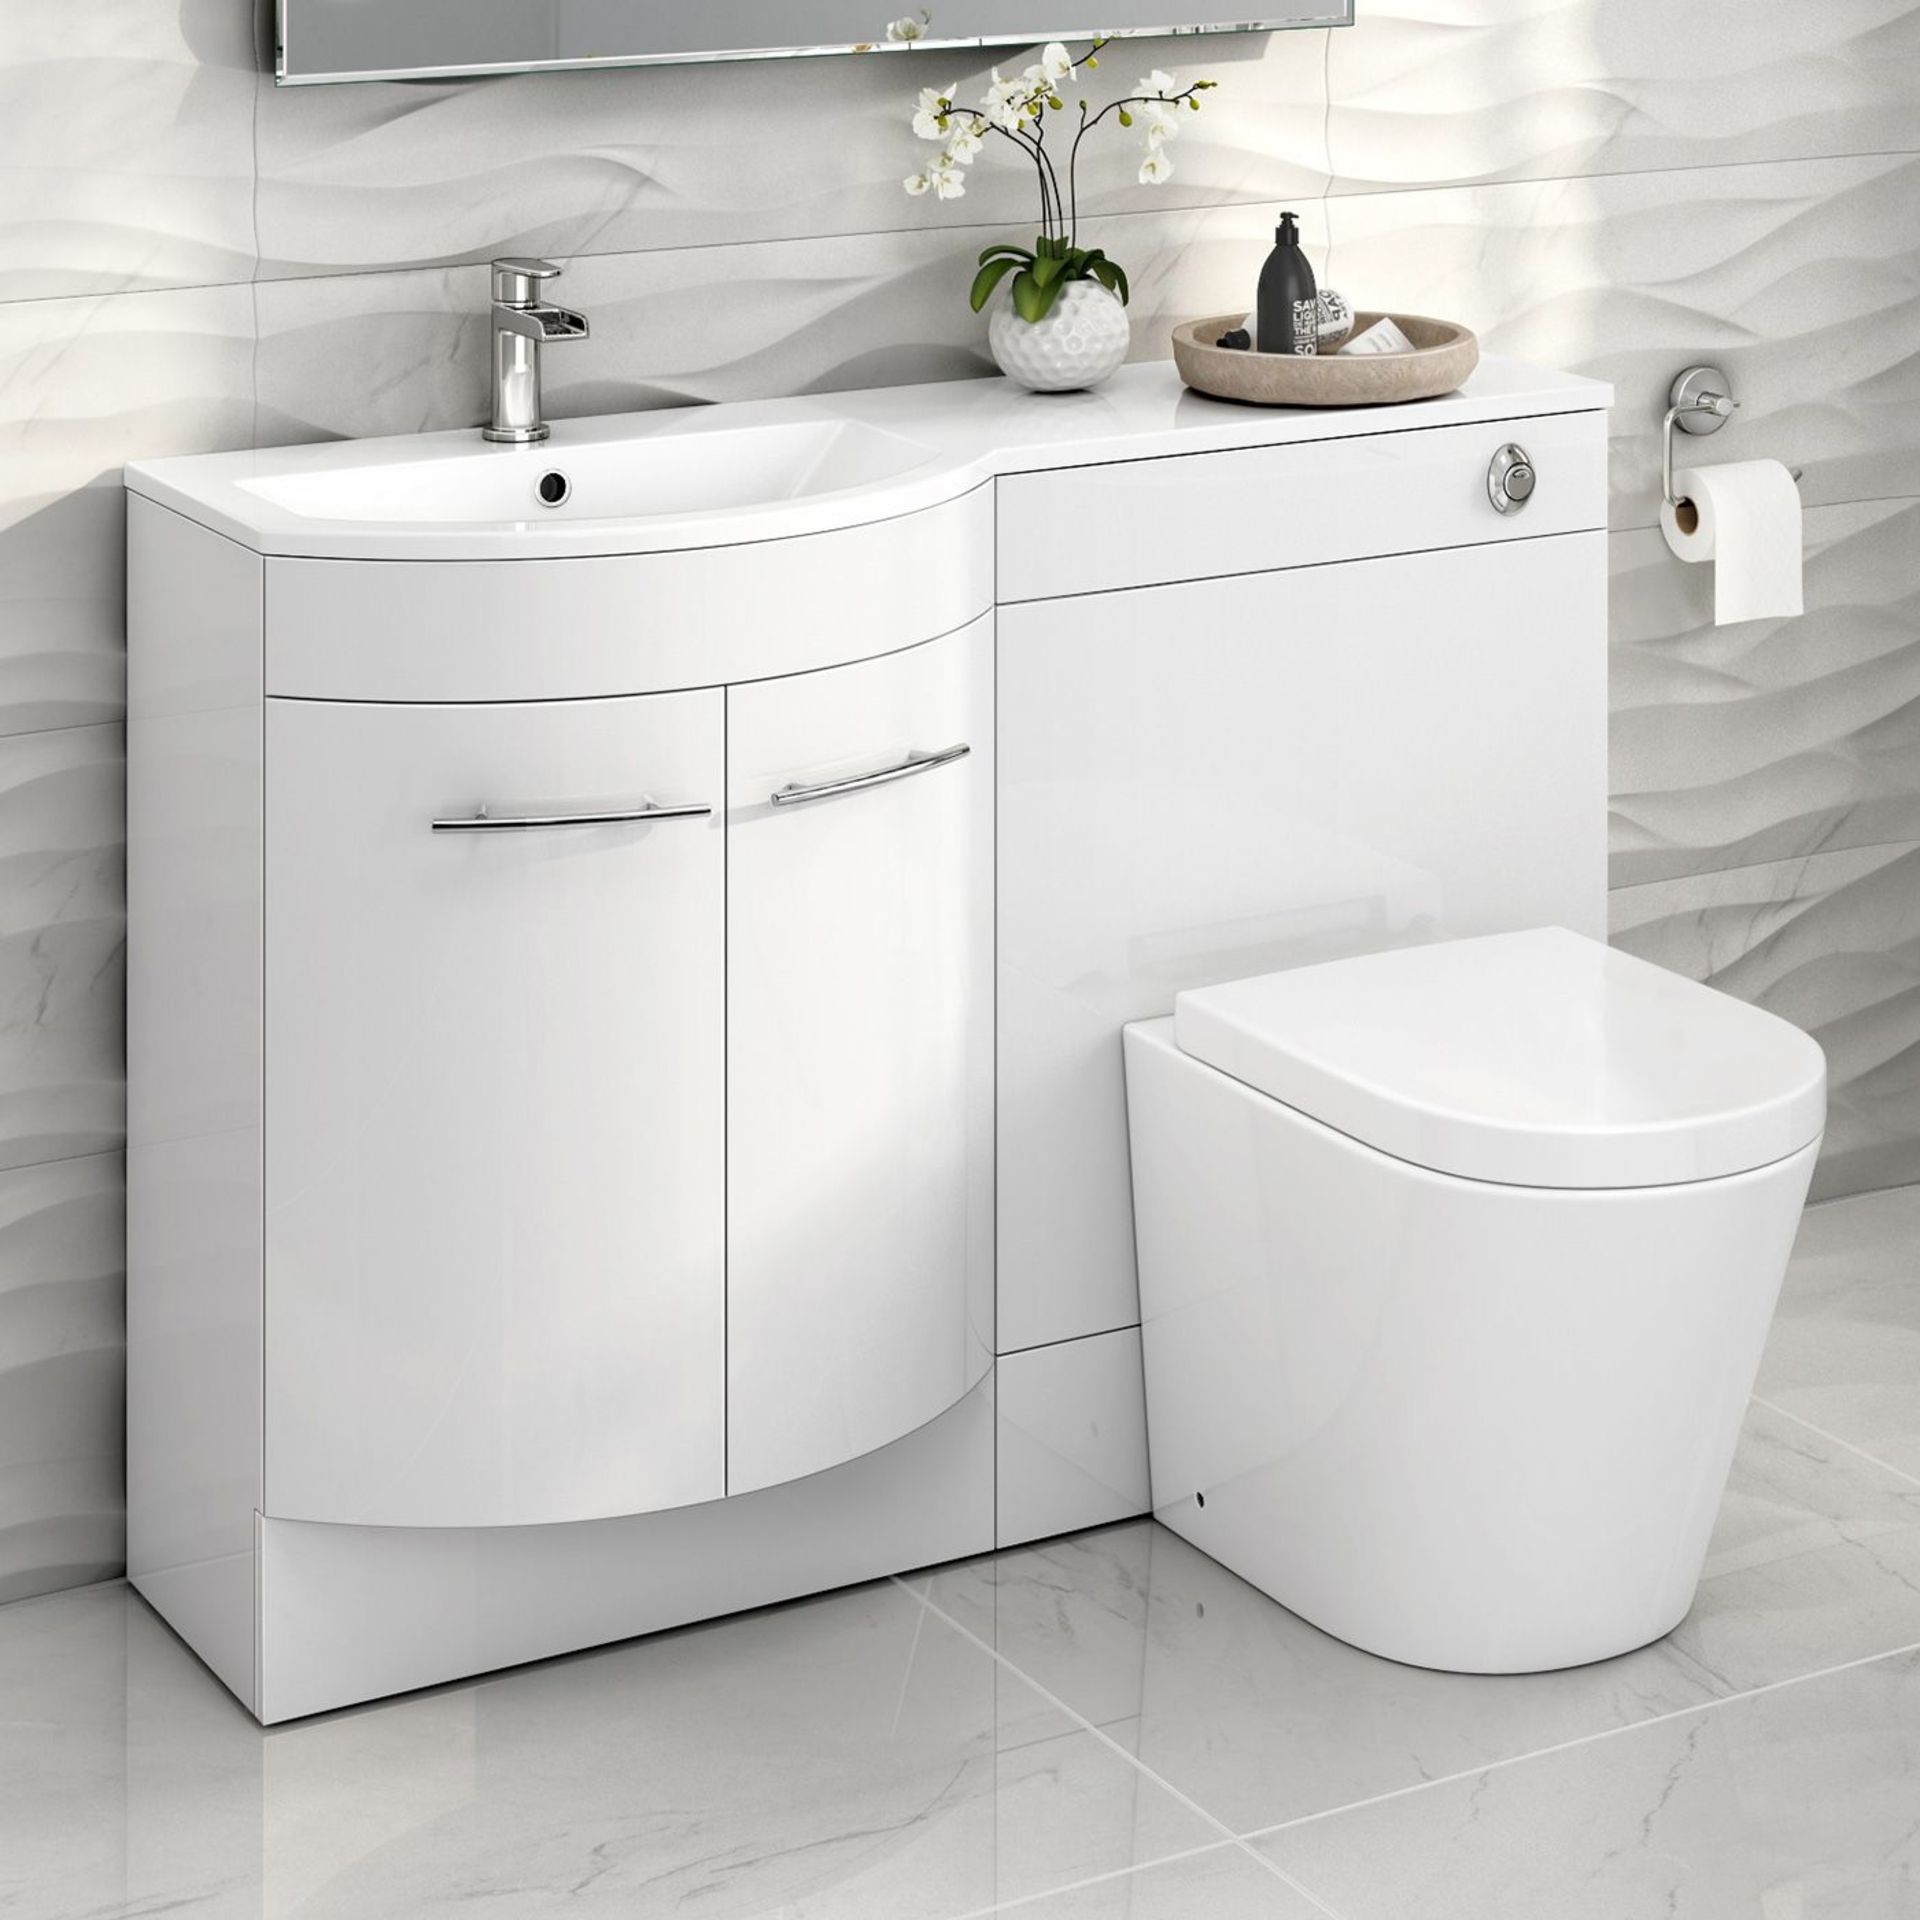 New Boxed 1200mm Alexis White Gloss Left Hand Vanity Unit , Florence Pan. RRP £999.99.Contempo...